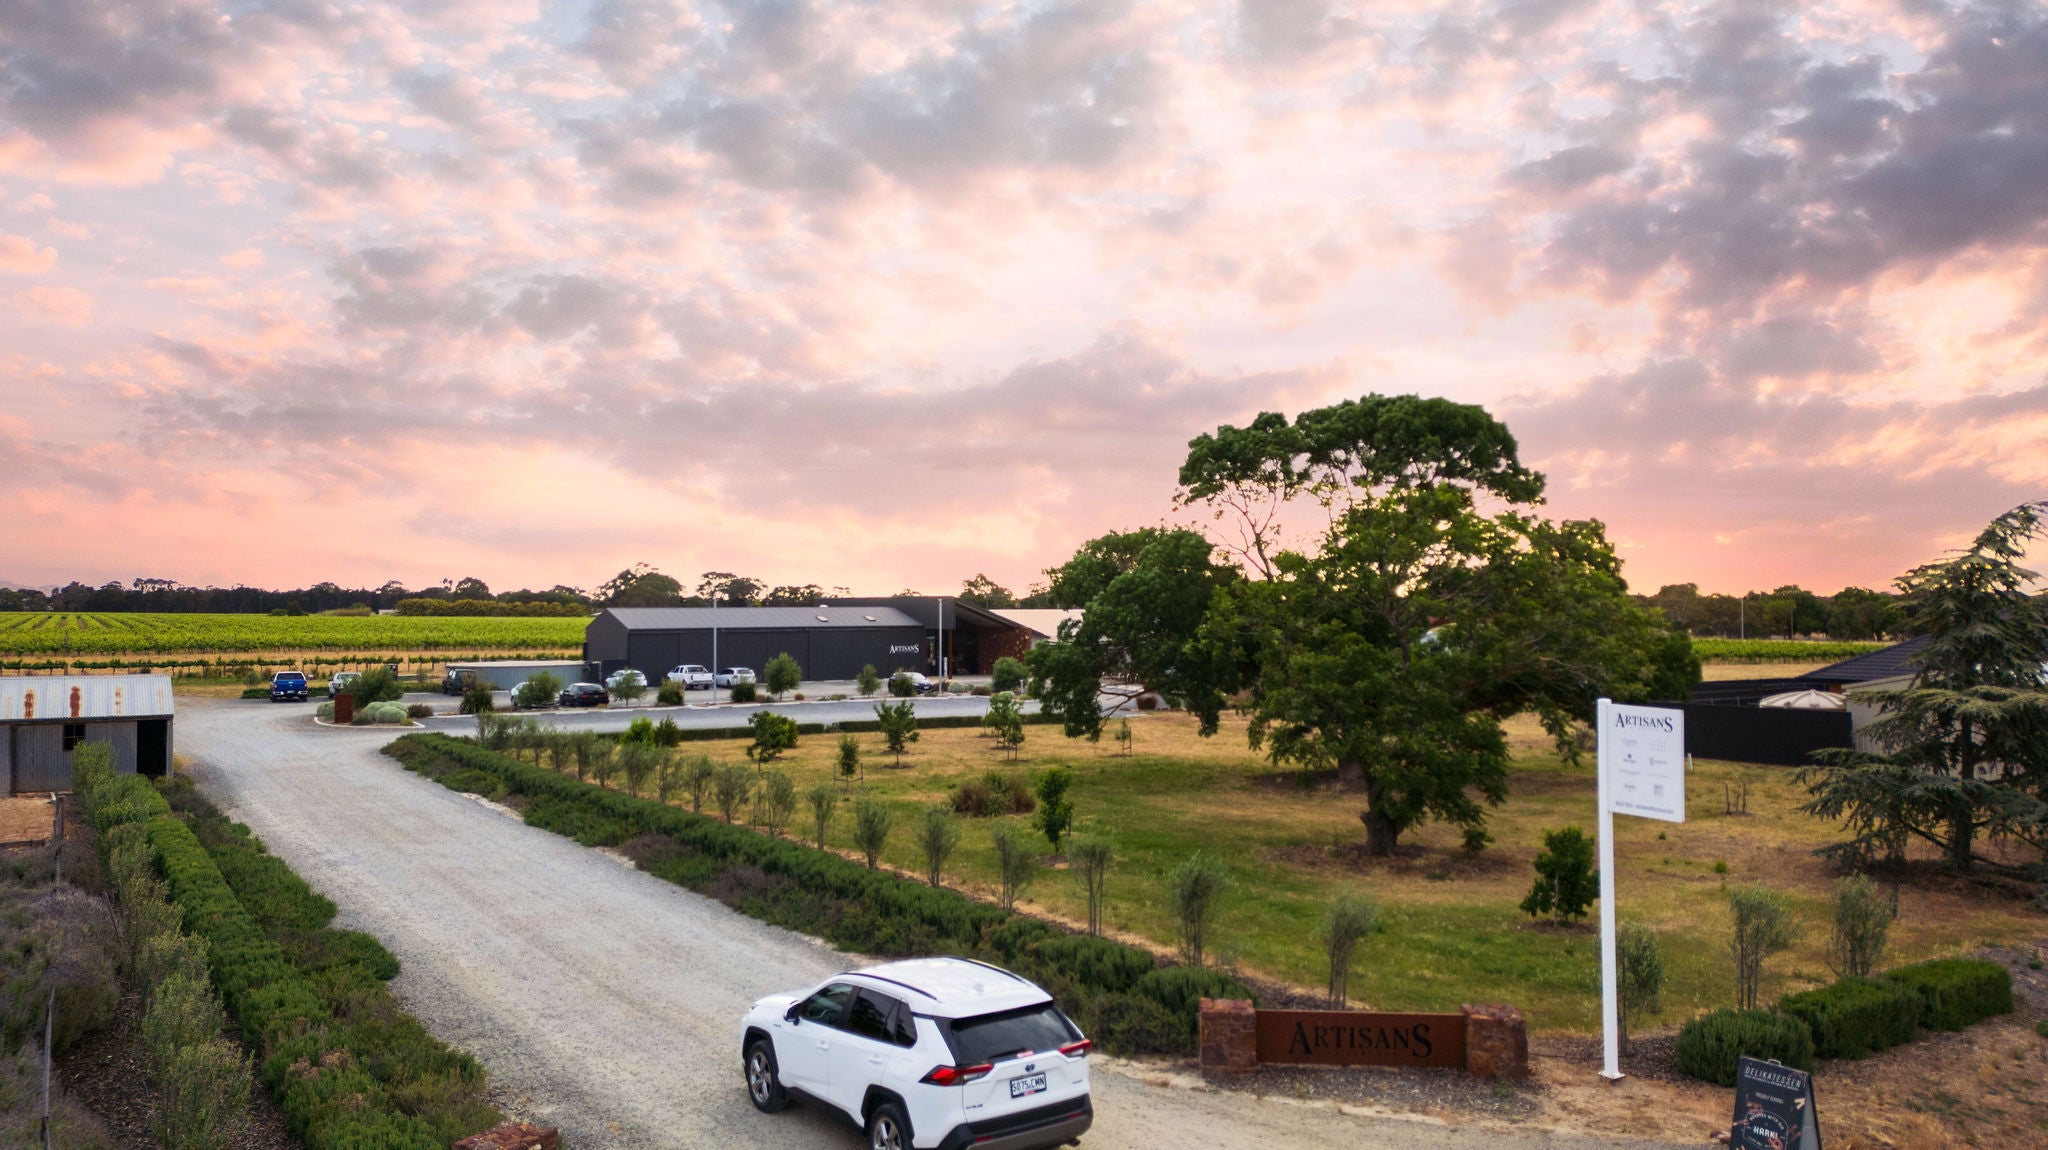 Discovering the Scenic Route: How to Drive to the Barossa Valley and Locate Artisans of Barossa